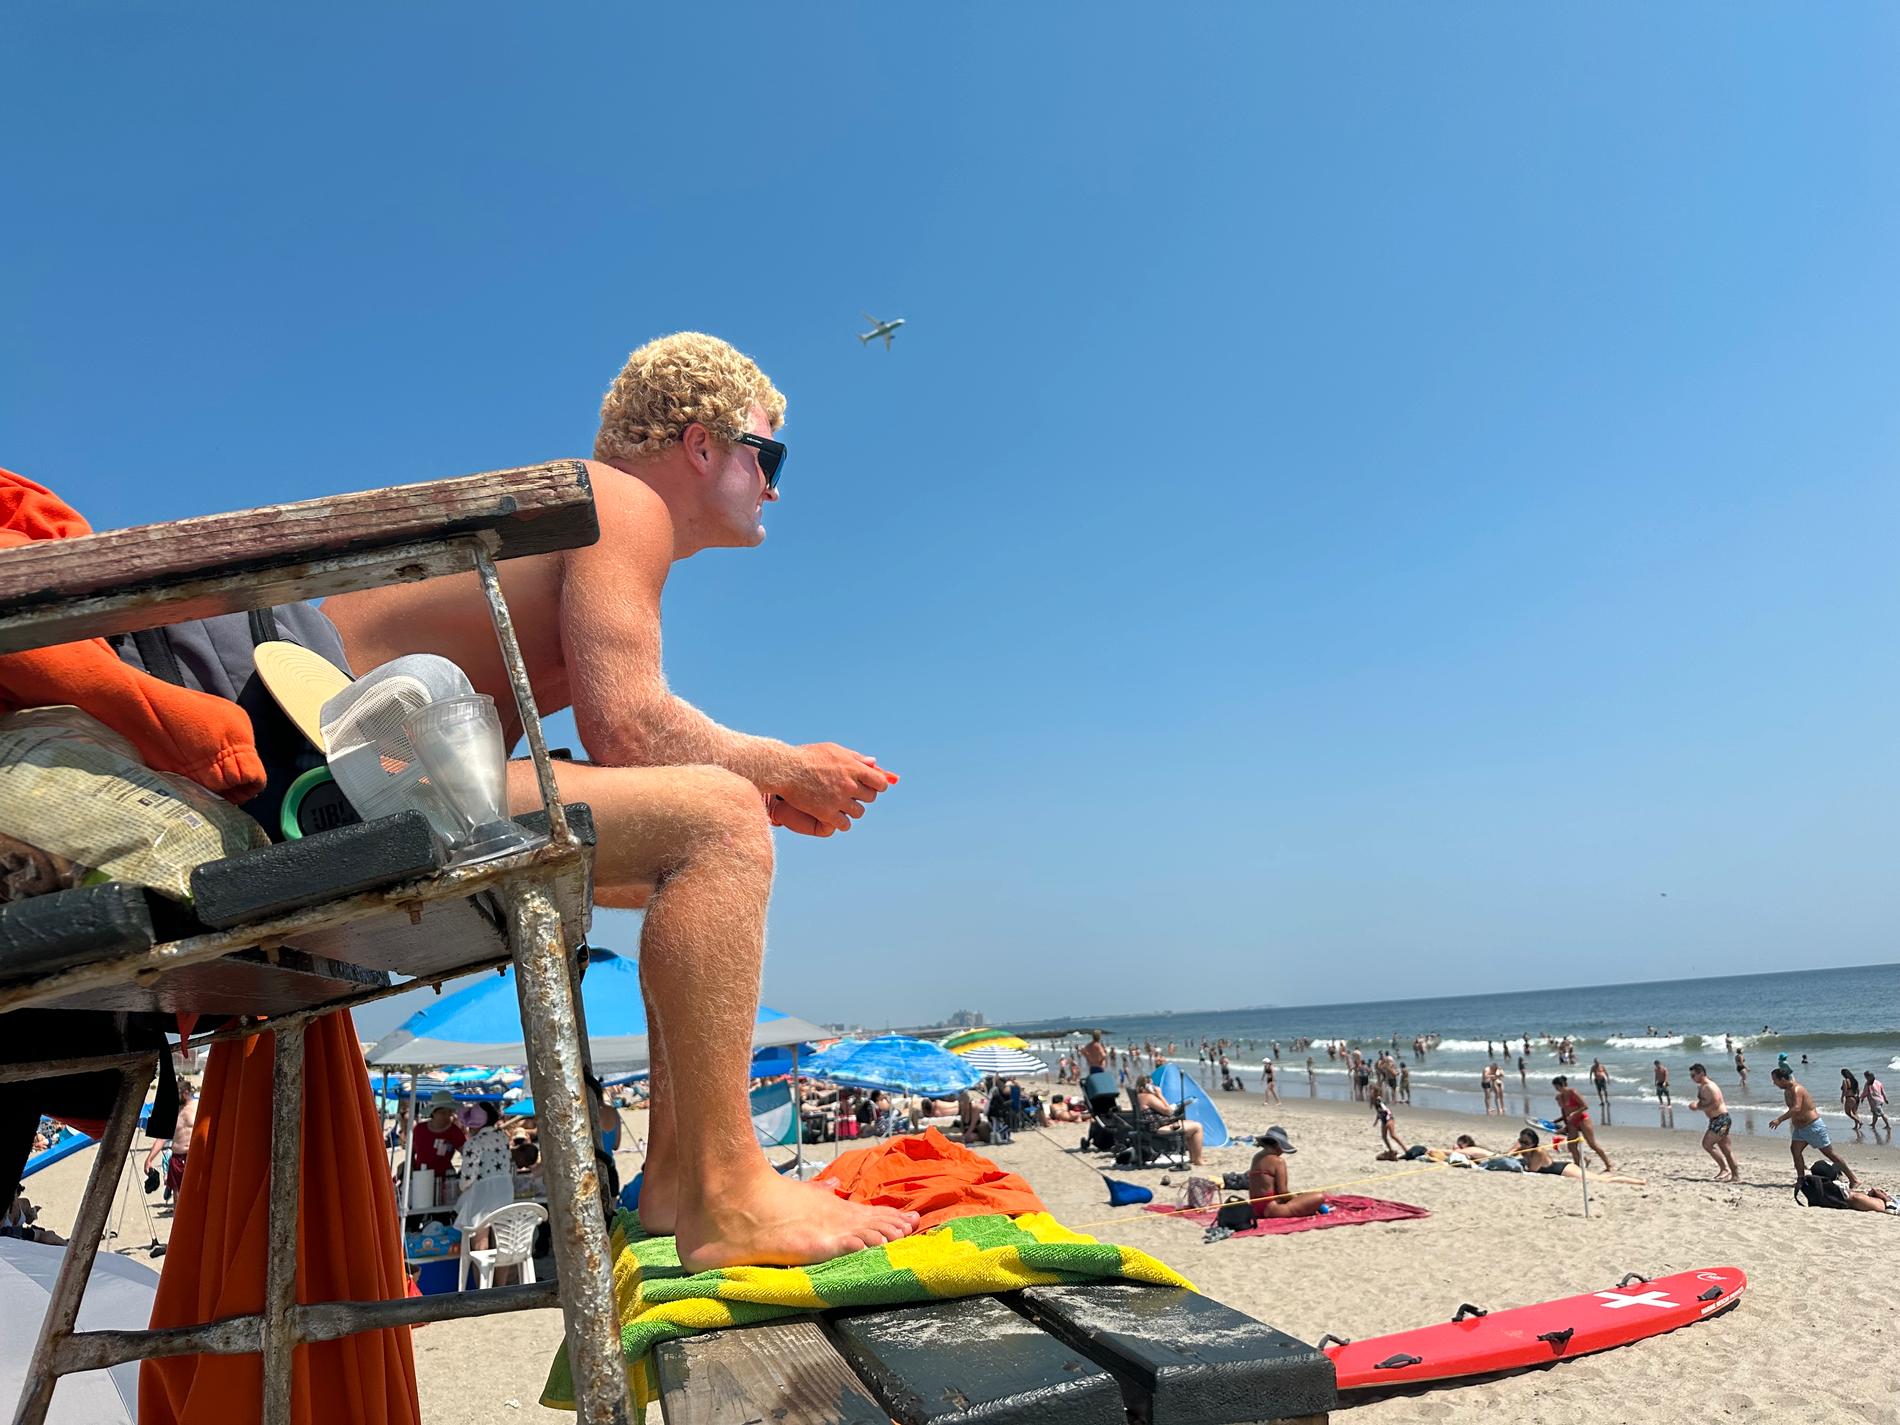 Shark scare in New York: – A lot of anxiety